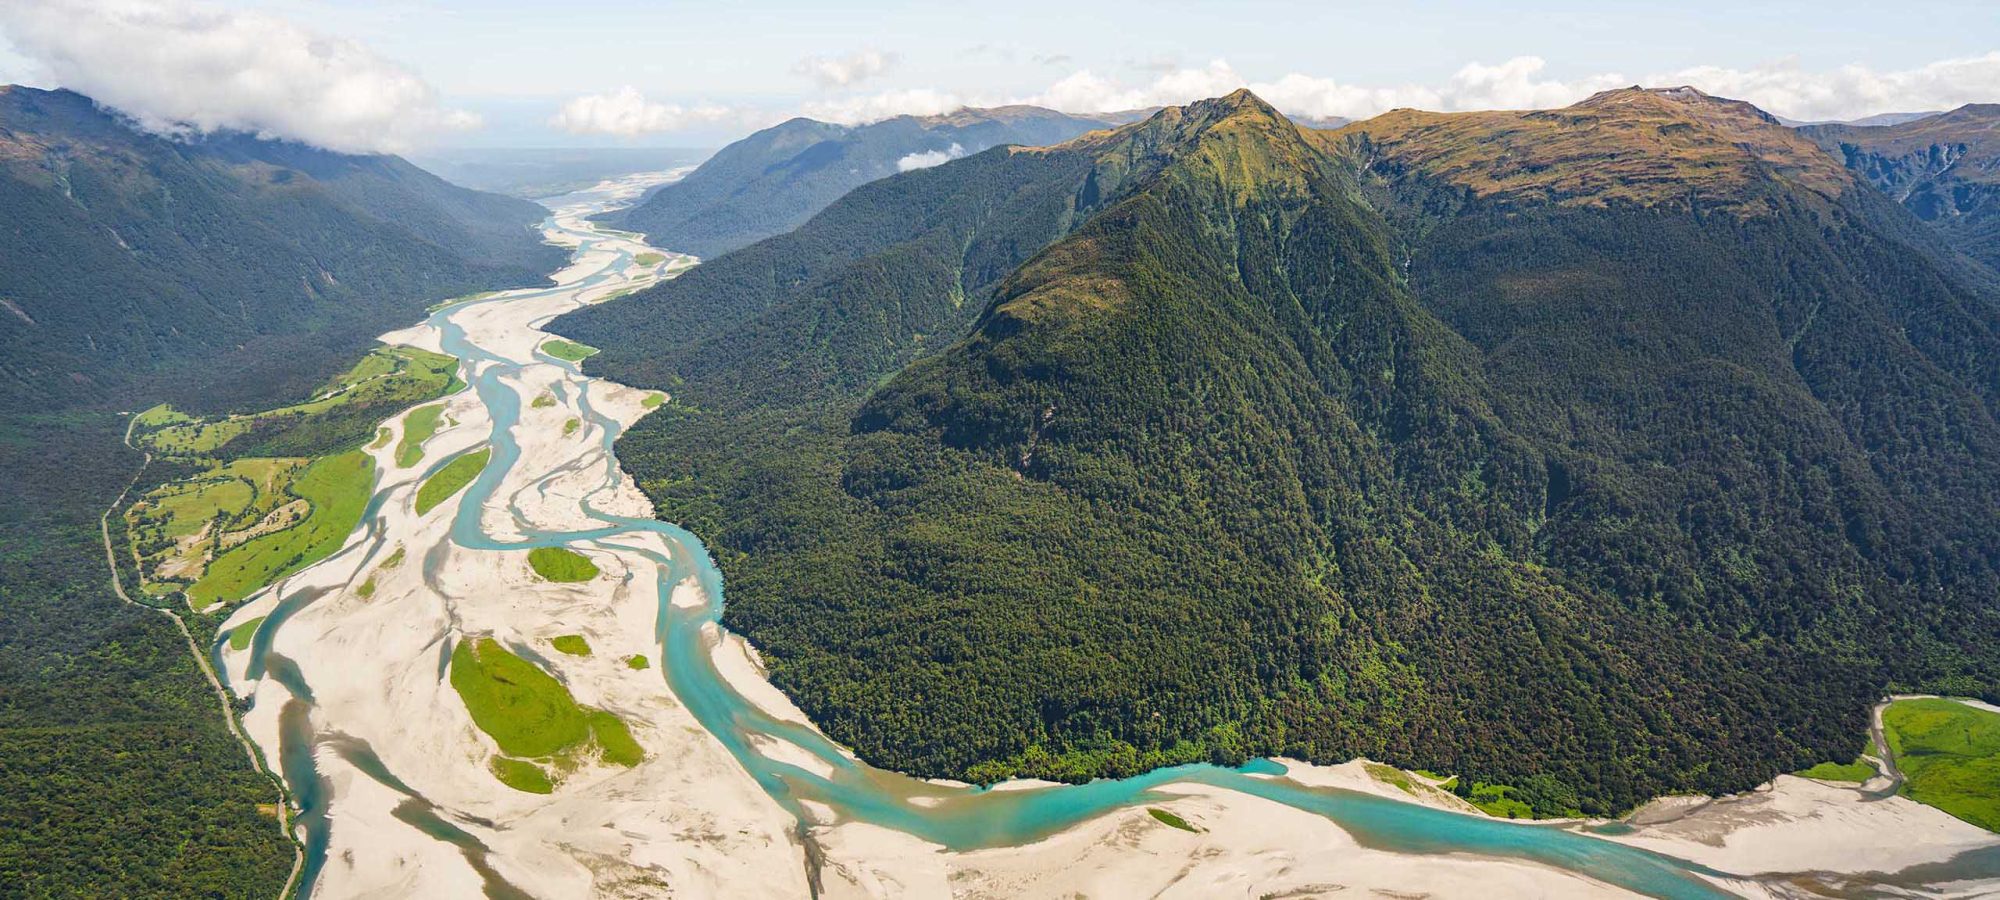 Region-West-Coast-Helicopter-Flight-View-River-Mountains-Banner